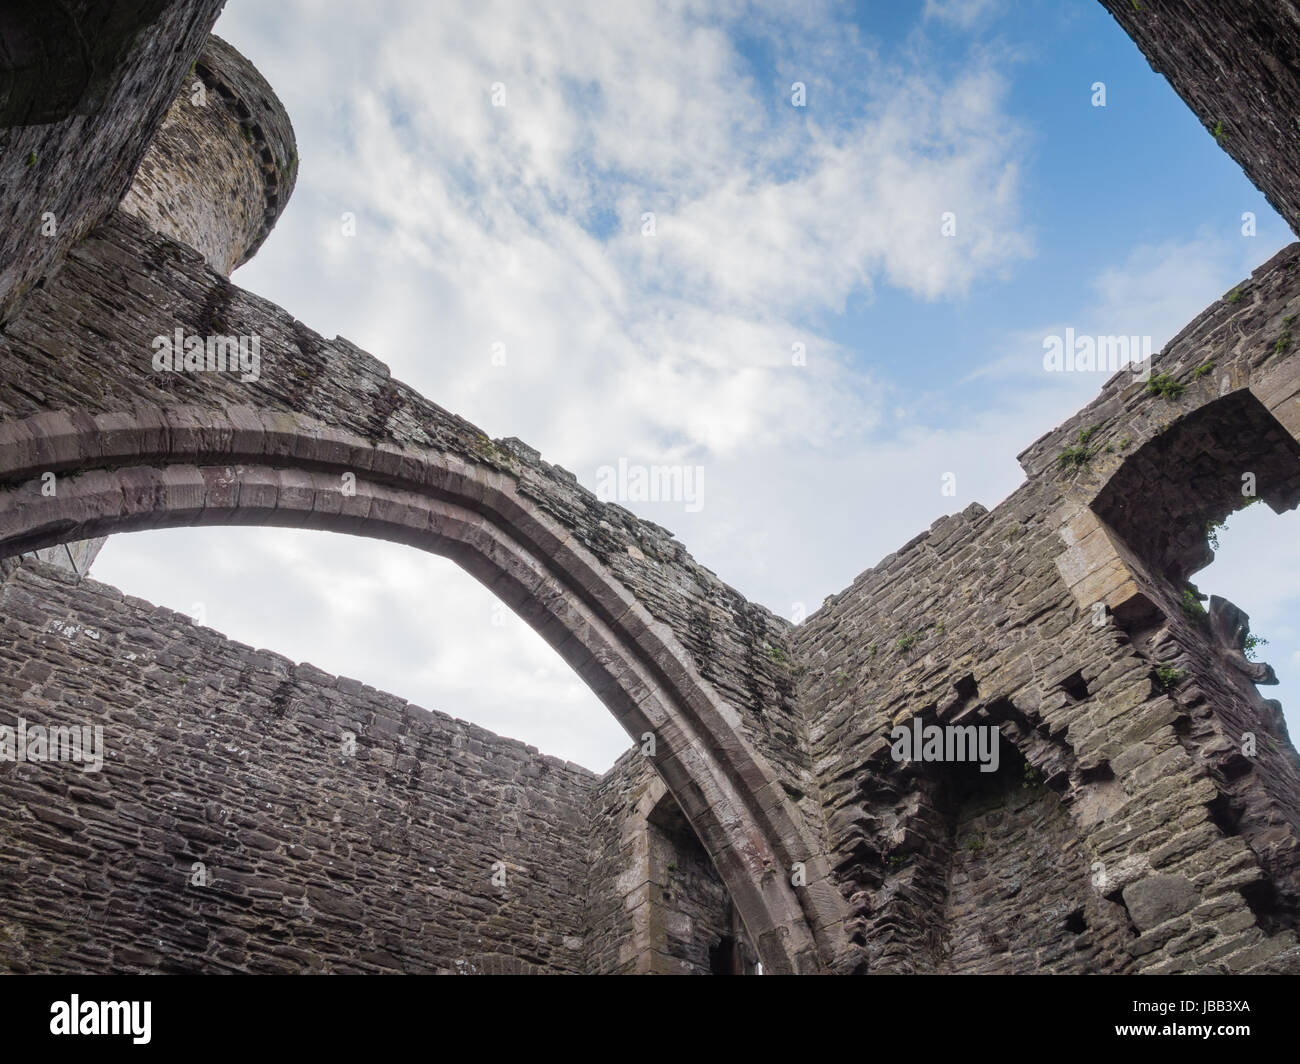 View to the sky from inside massive Conwy Castle in Wales built by king Edward I as one of the fortifications during the conquest of Wales in the 13th Century Stock Photo